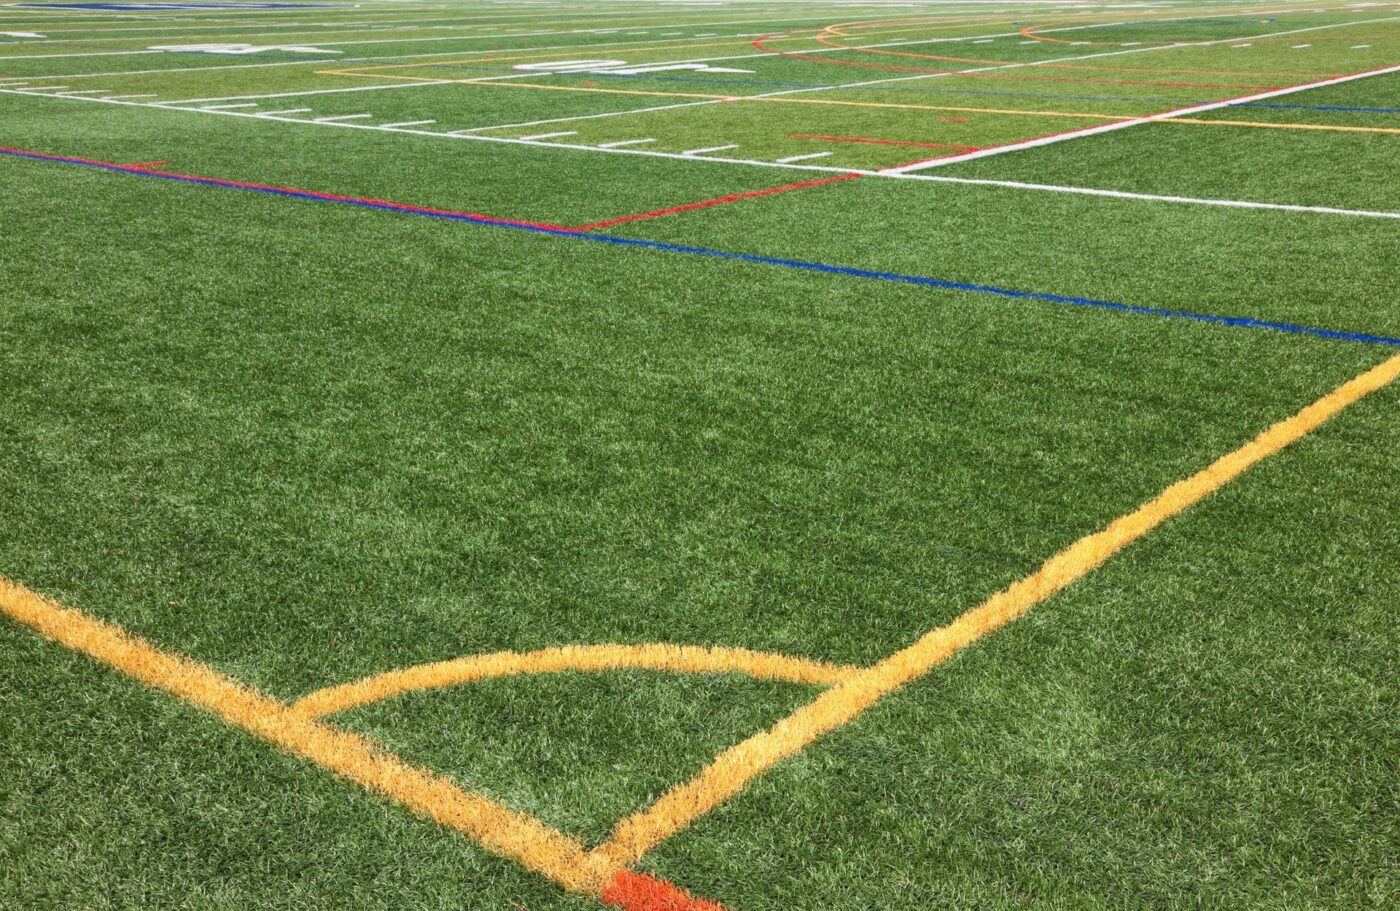 A close-up view of a synthetic turf field marked with various colored lines for different sports. Yellow, red, blue, and white lines intersect across the green surface, showing boundaries and play areas for activities like soccer, football, and lacrosse—an ideal upgrade for St. Johns homeowners seeking artificial turf installation to enhance their outdoor space.